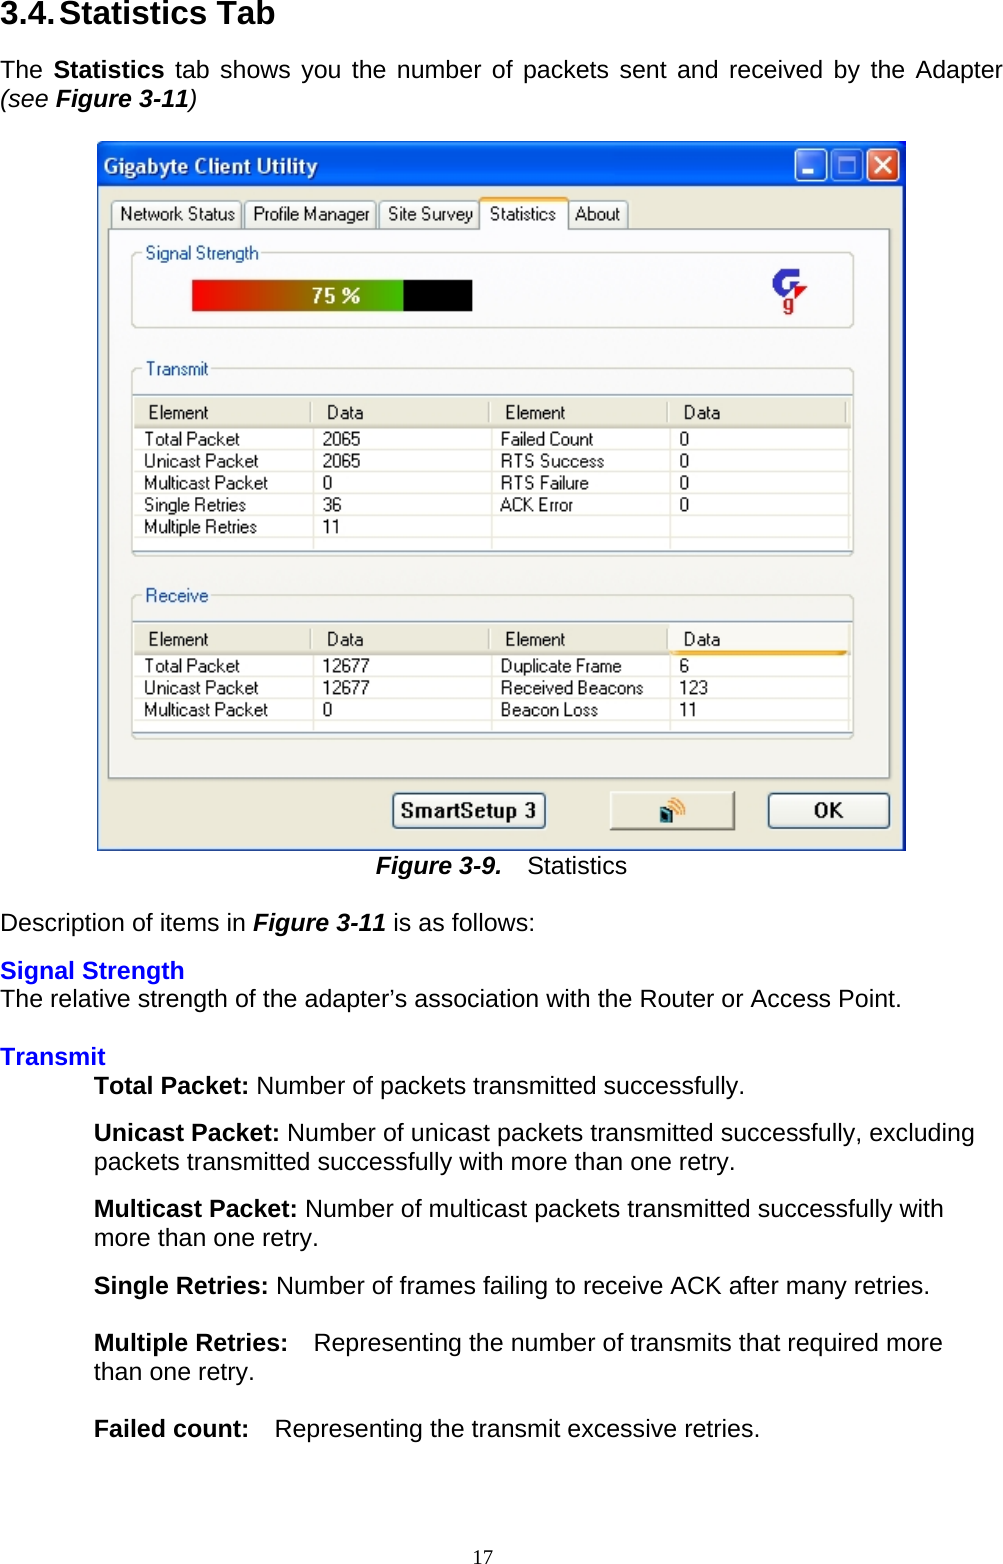 3.4. Statistics  Tab  The Statistics tab shows you the number of packets sent and received by the Adapter (see Figure 3-11)   Figure 3-9.   Statistics  D escription of items in Figure 3-11 is as follows: Signal Strength The relative strength of the adapter’s association with the Router or Access Point.      Transmit Total Packet: Number of packets transmitted successfully.  Unicast Packet: Number of unicast packets transmitted successfully, excluding packets transmitted successfully with more than one retry.  Multicast Packet: Number of multicast packets transmitted successfully with more than one retry.  Single Retries: Number of frames failing to receive ACK after many retries.  Multiple Retries:    Representing the number of transmits that required more than one retry.  Failed count:    Representing the transmit excessive retries.   17   